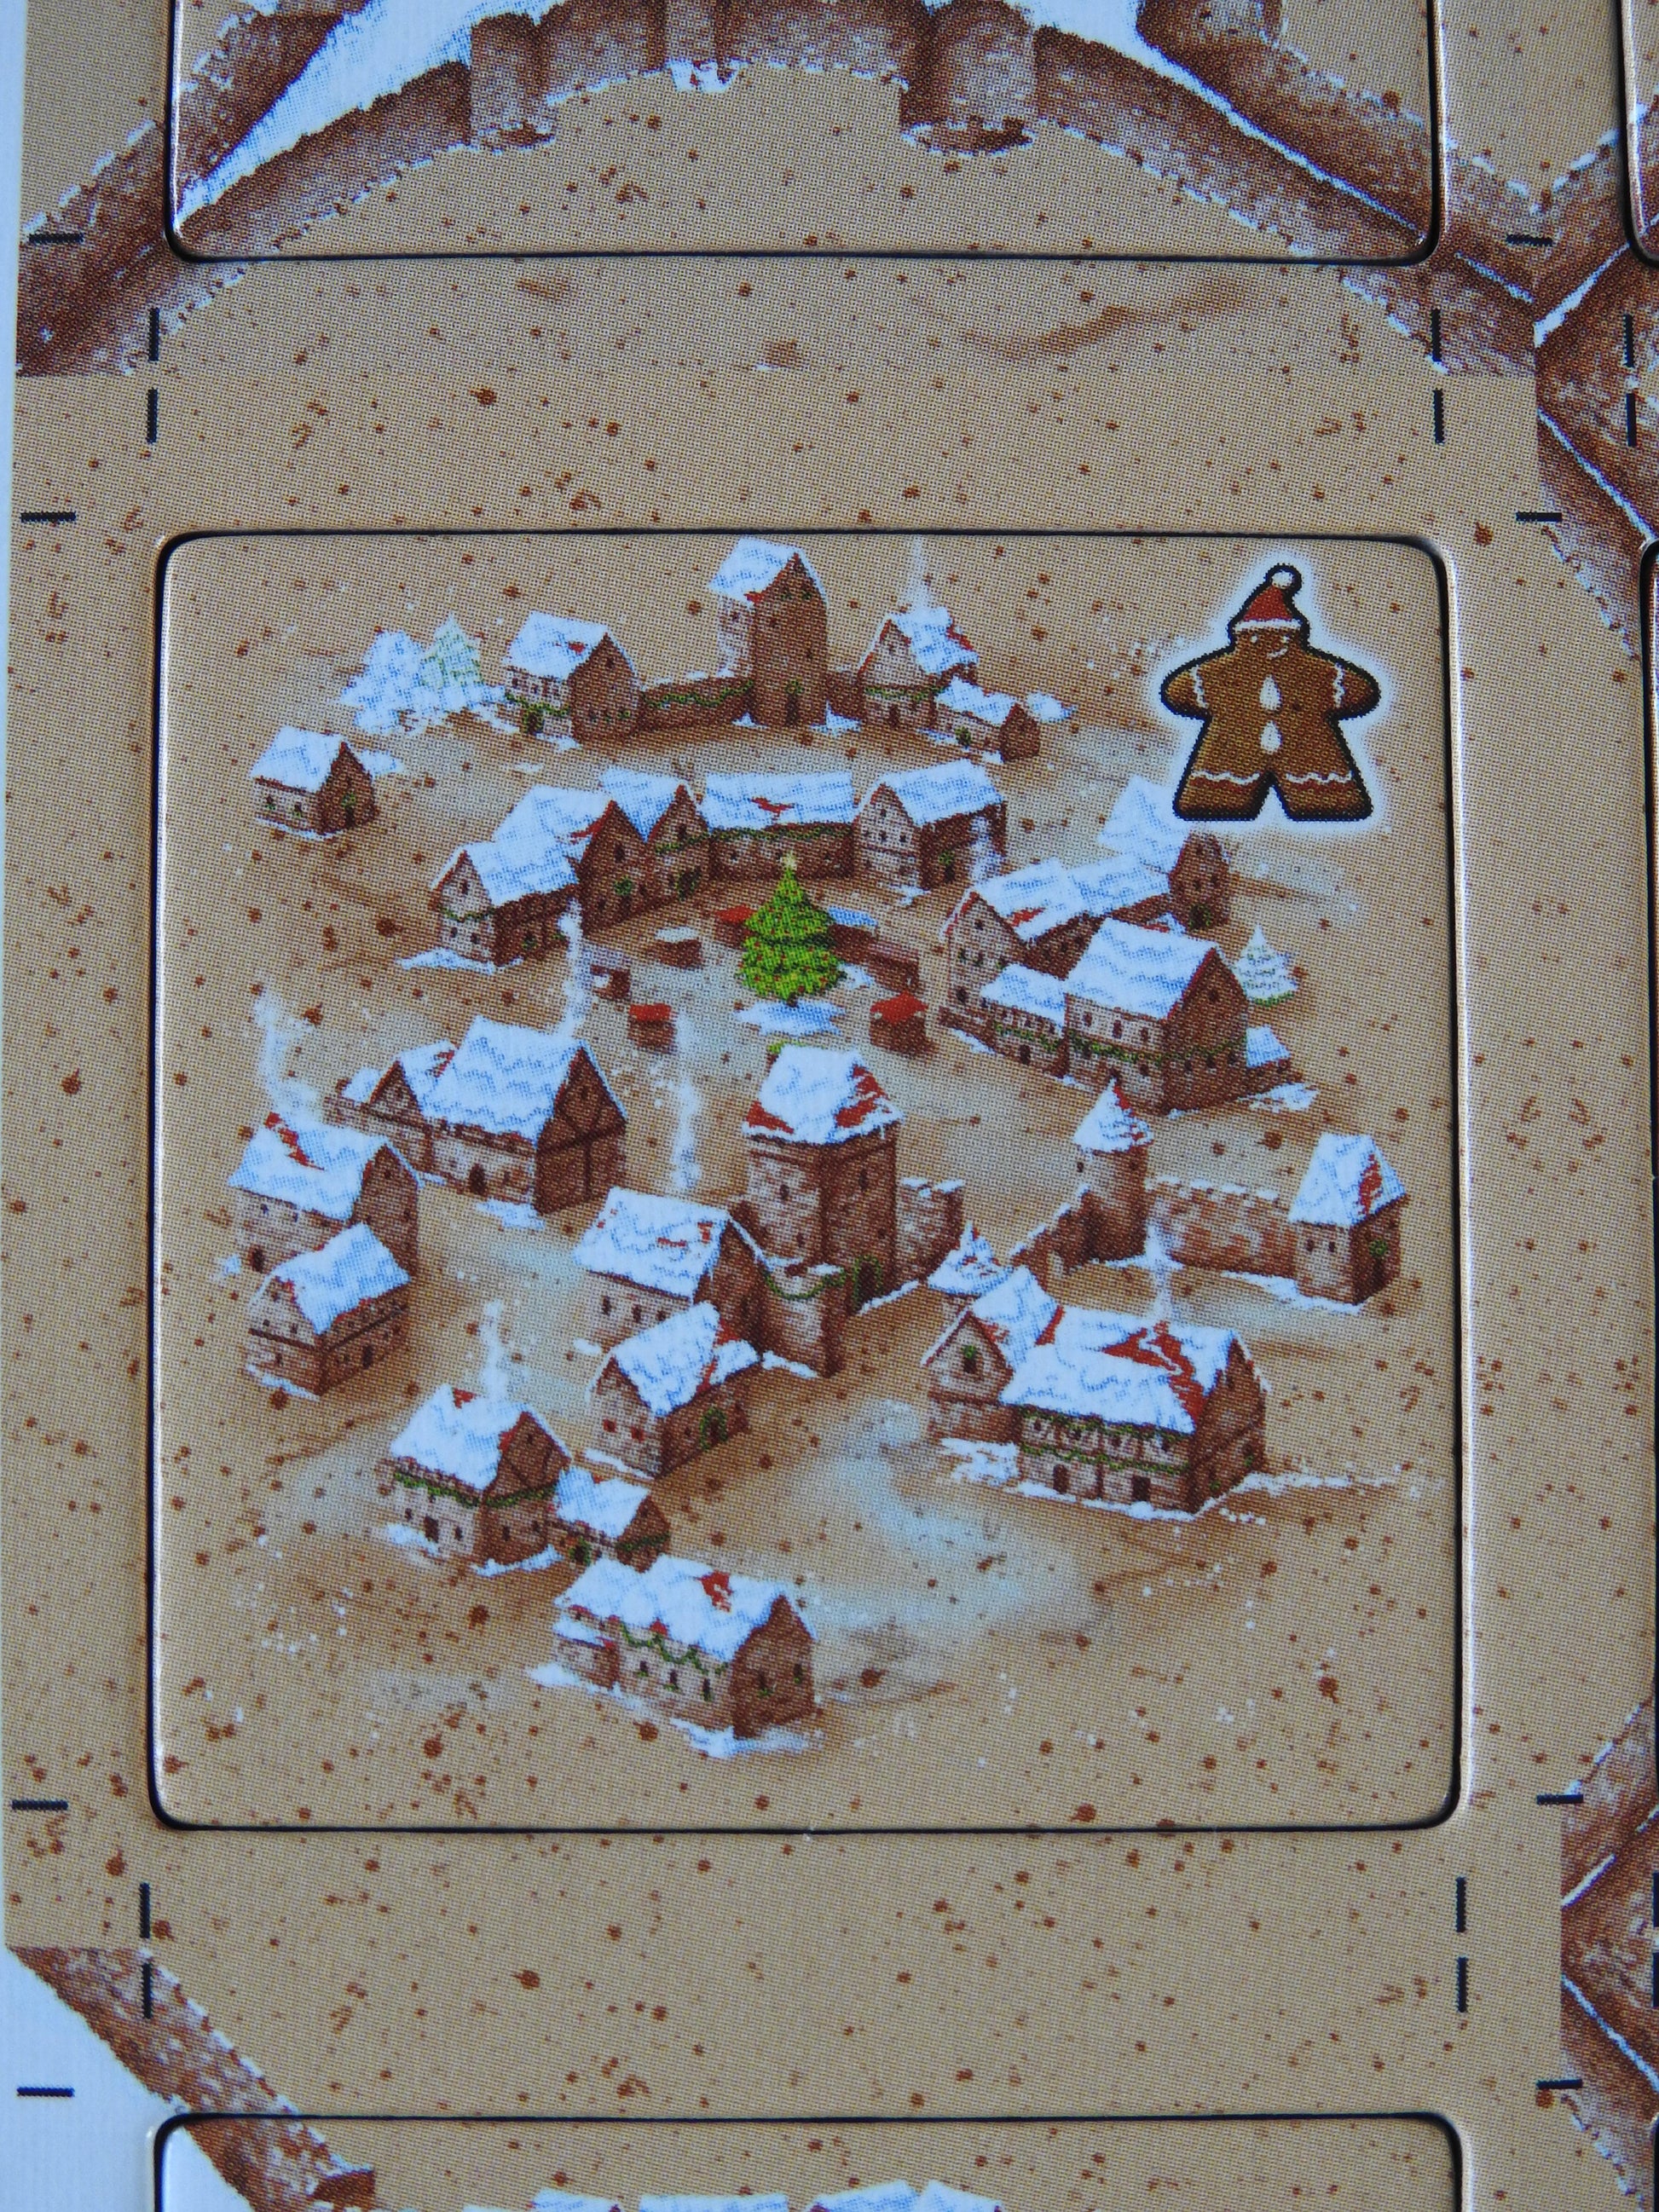 Close-up view of one of the city tiles included, with beautiful artwork of snow-dusted roofs.